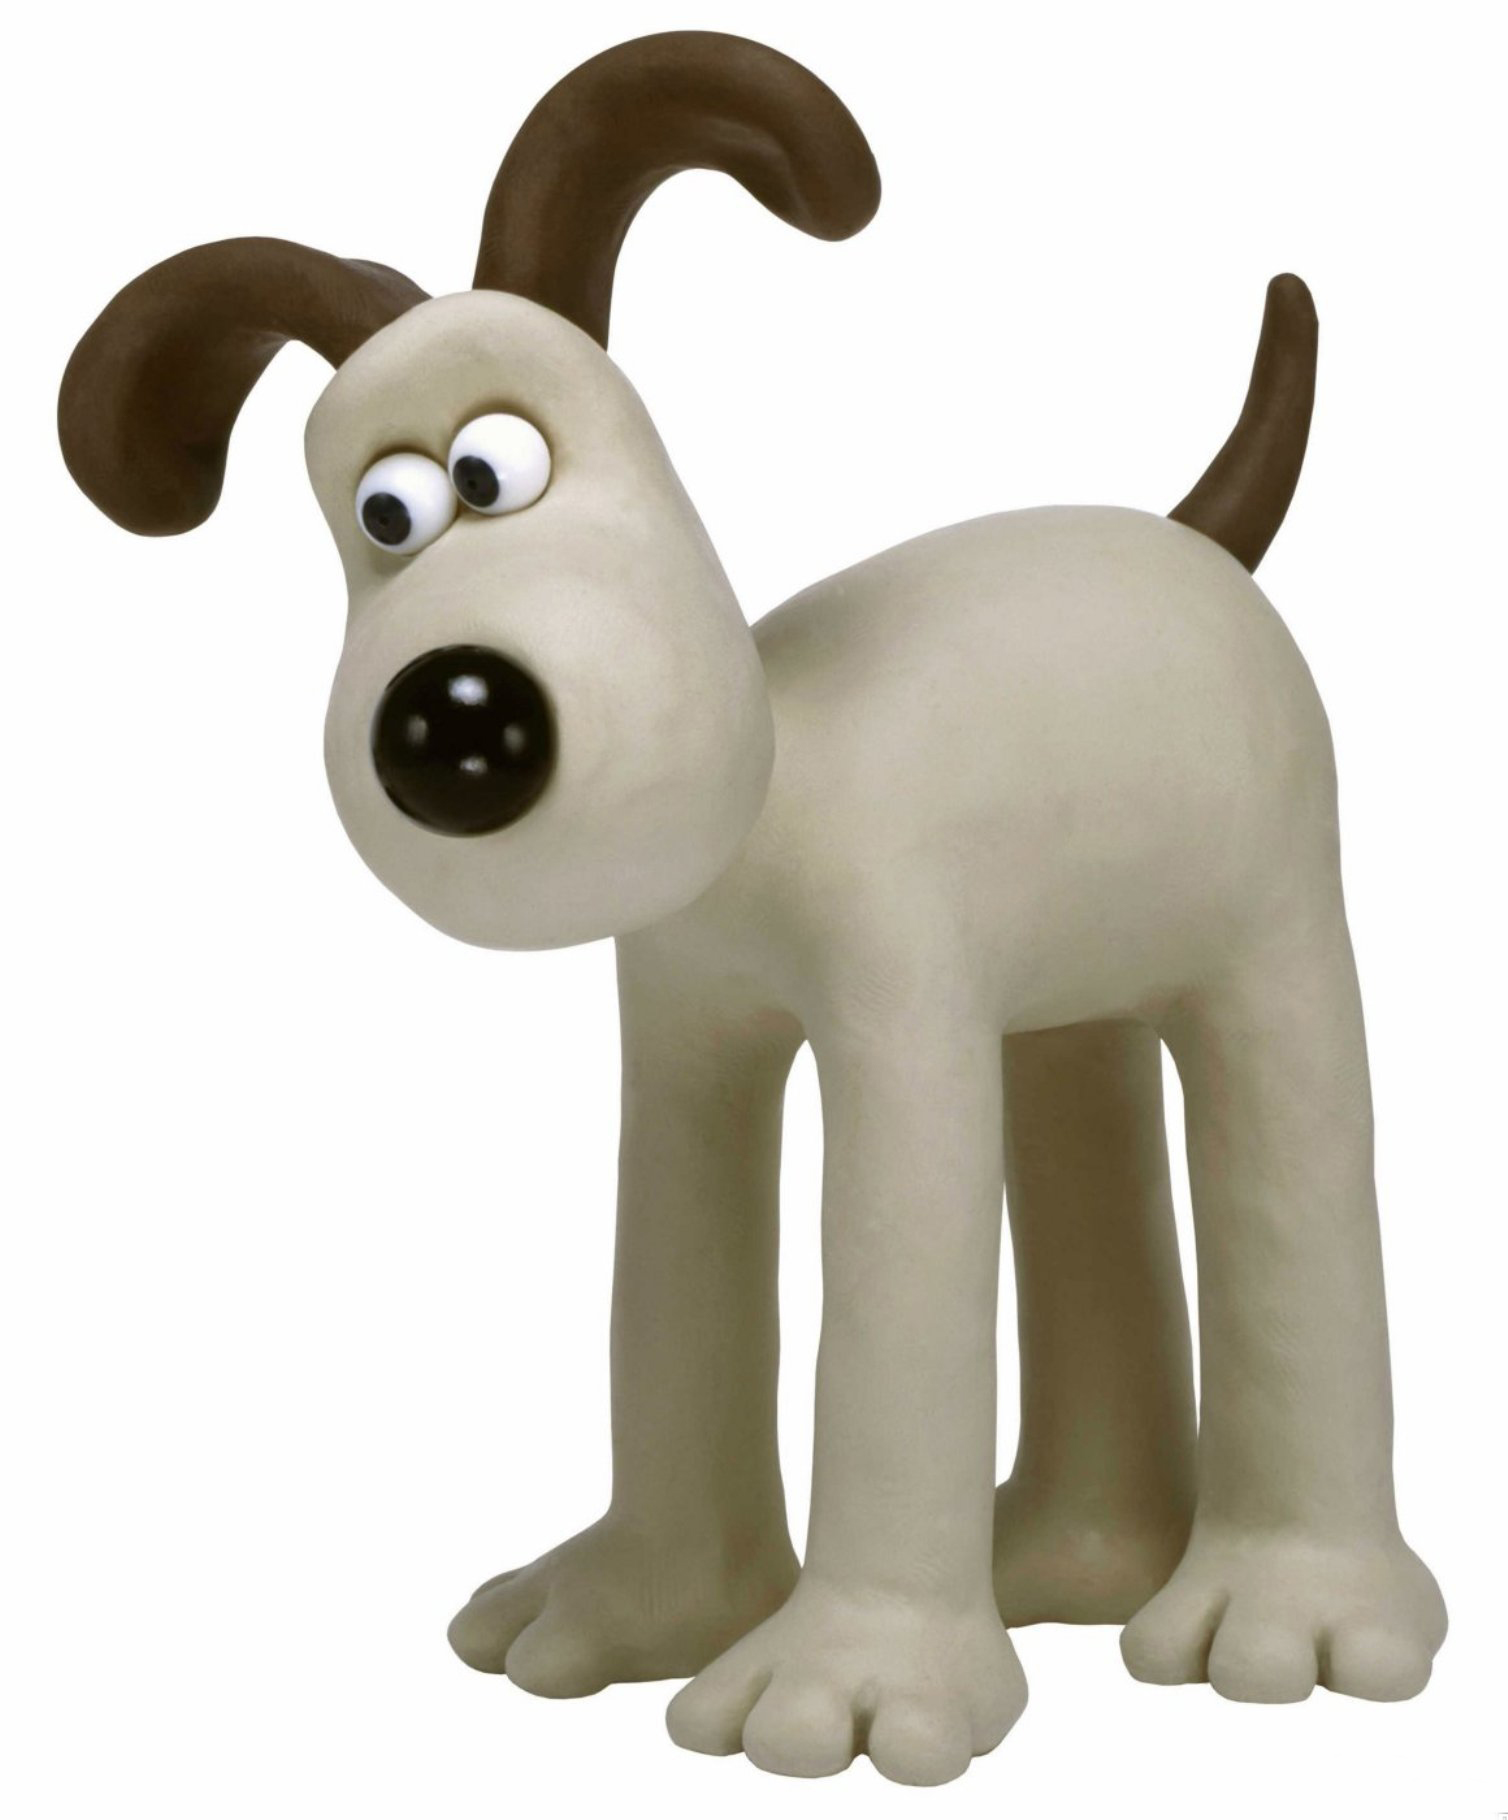 Image result for wallace and gromit images